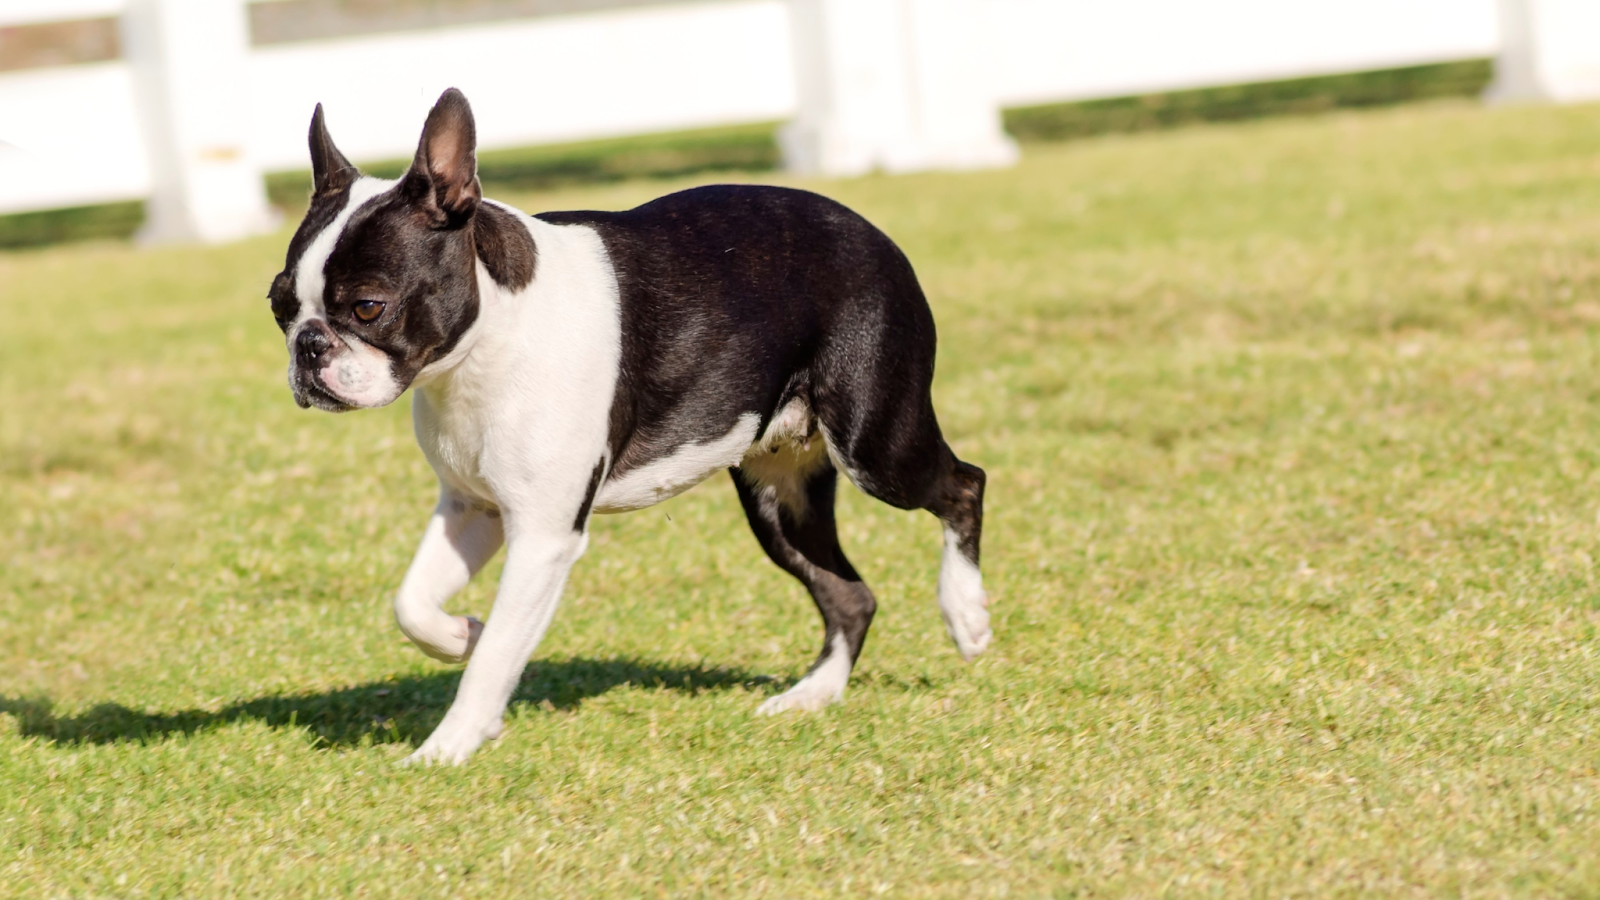 Black and white Boston Terrier and trotting on grass